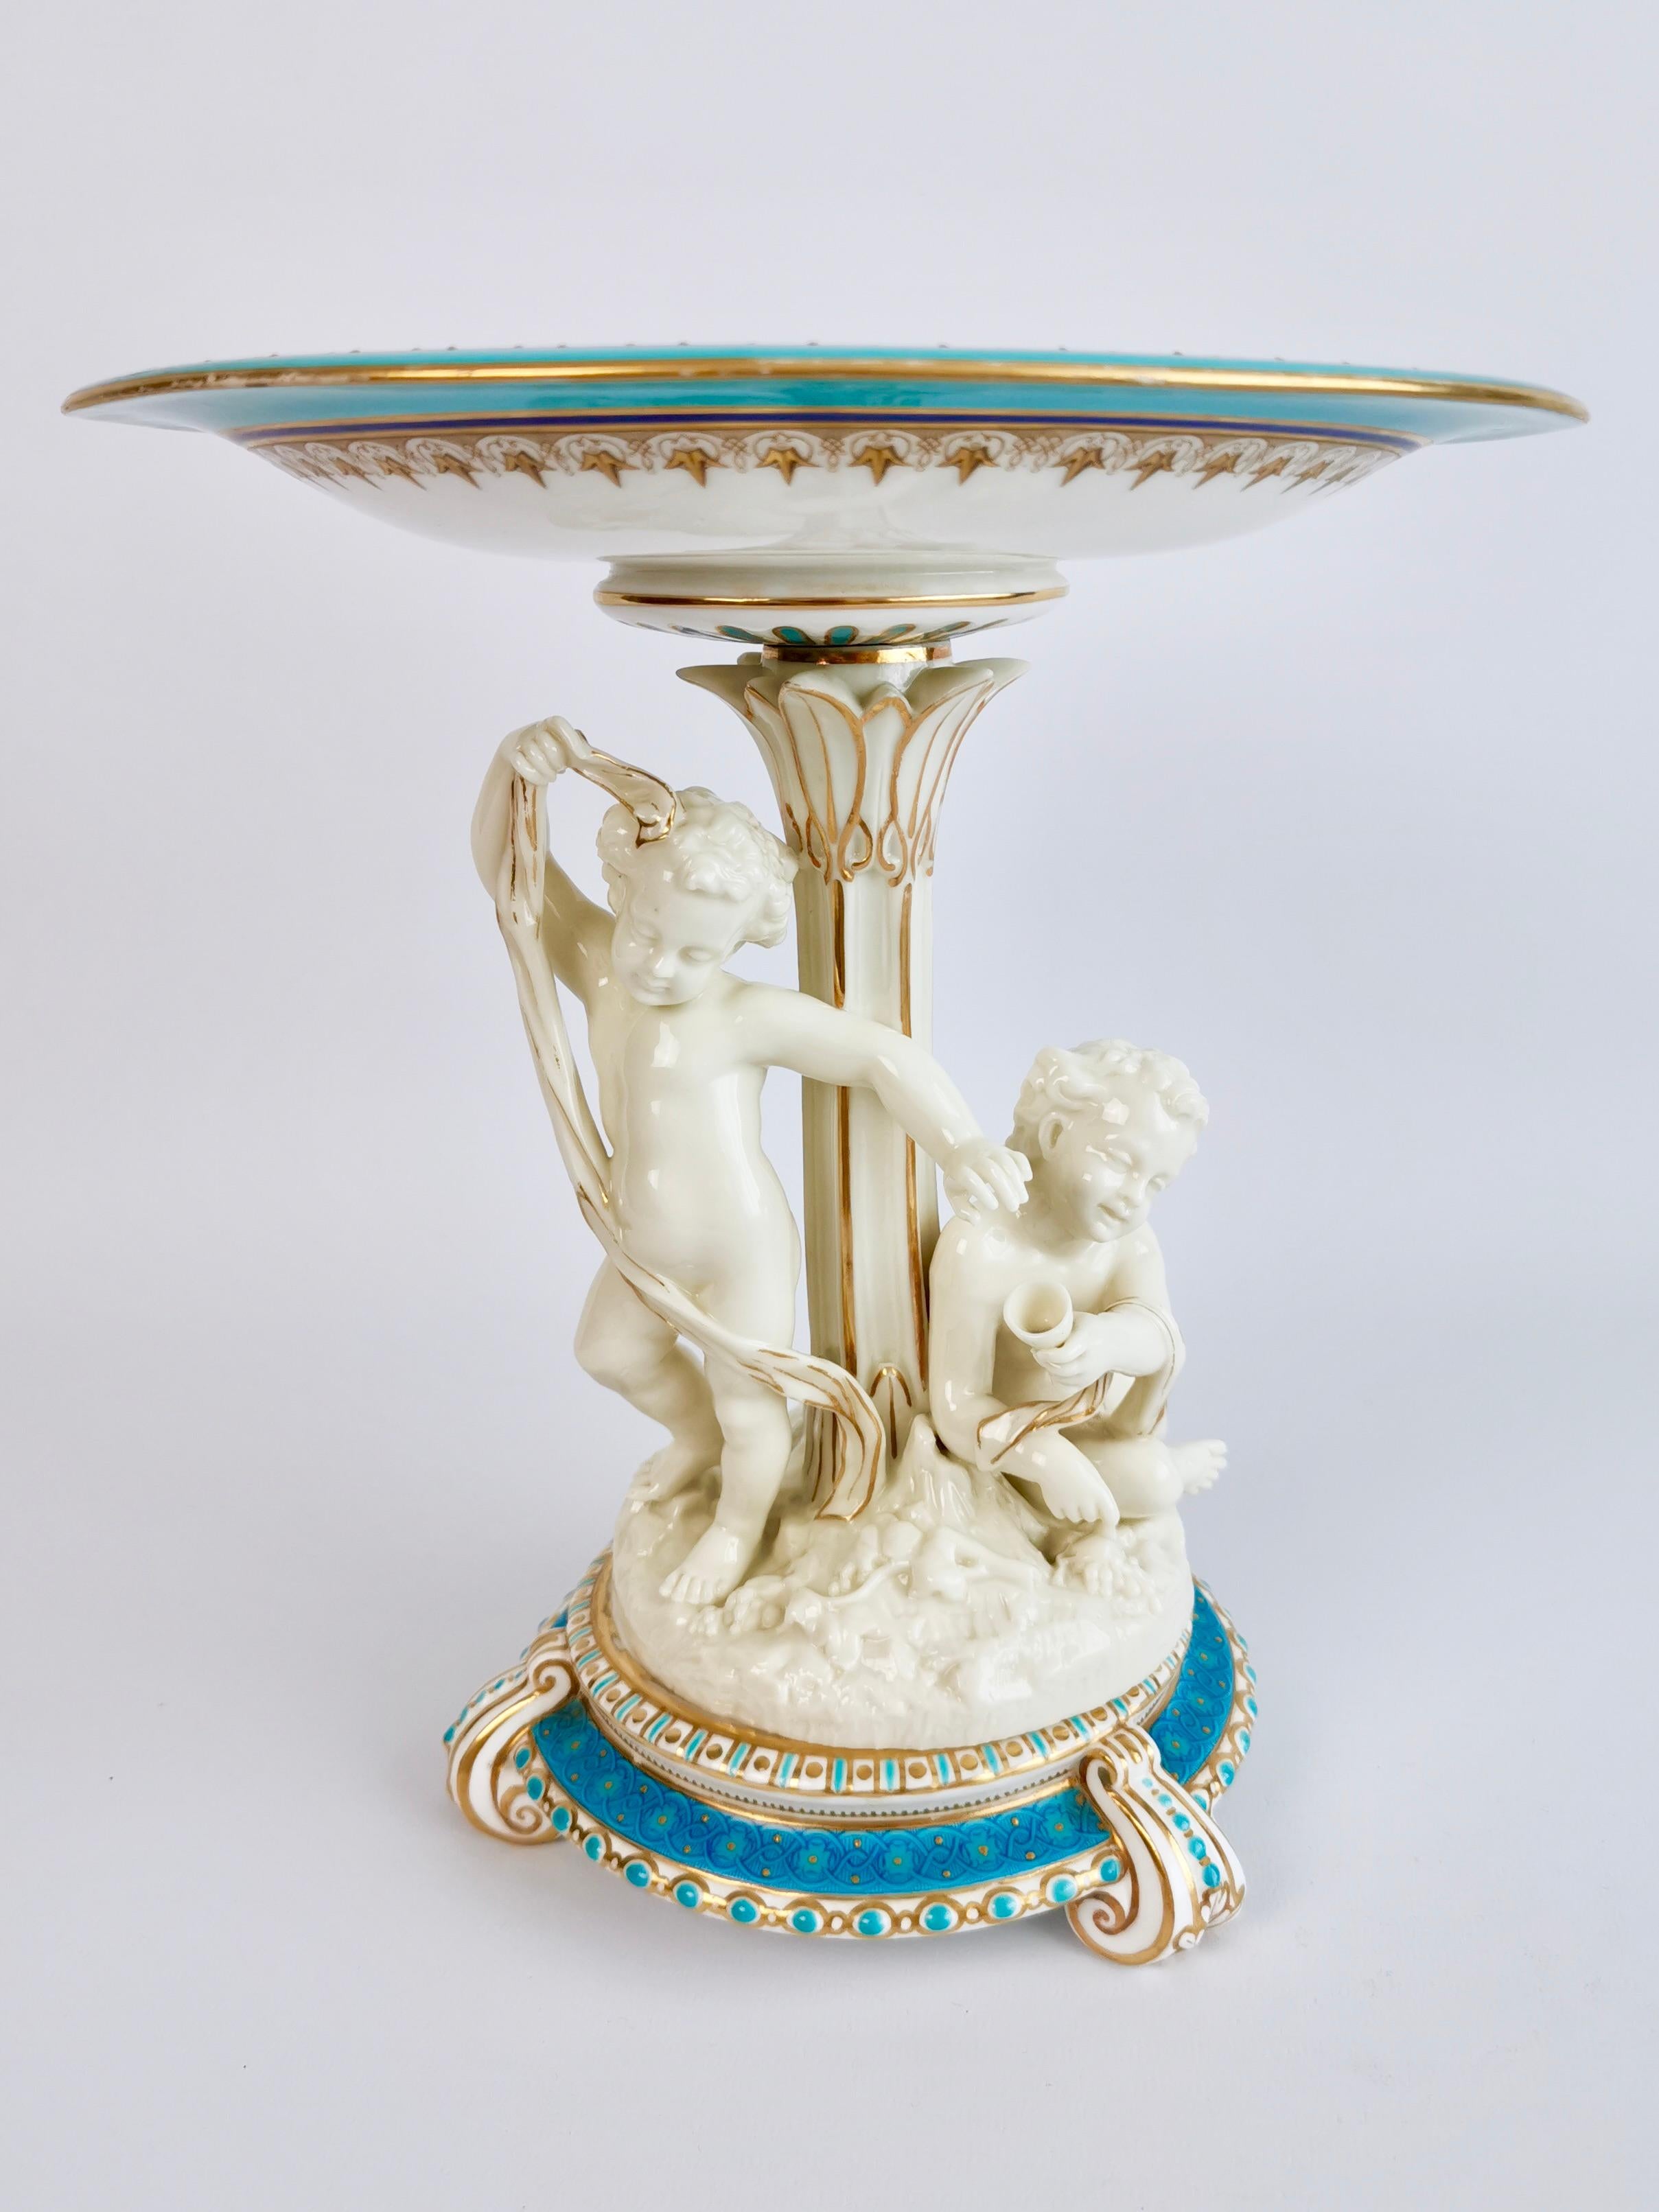 English Royal Worcester Porcelain Dessert Service, Turquoise with Parian Cherubs, 1910